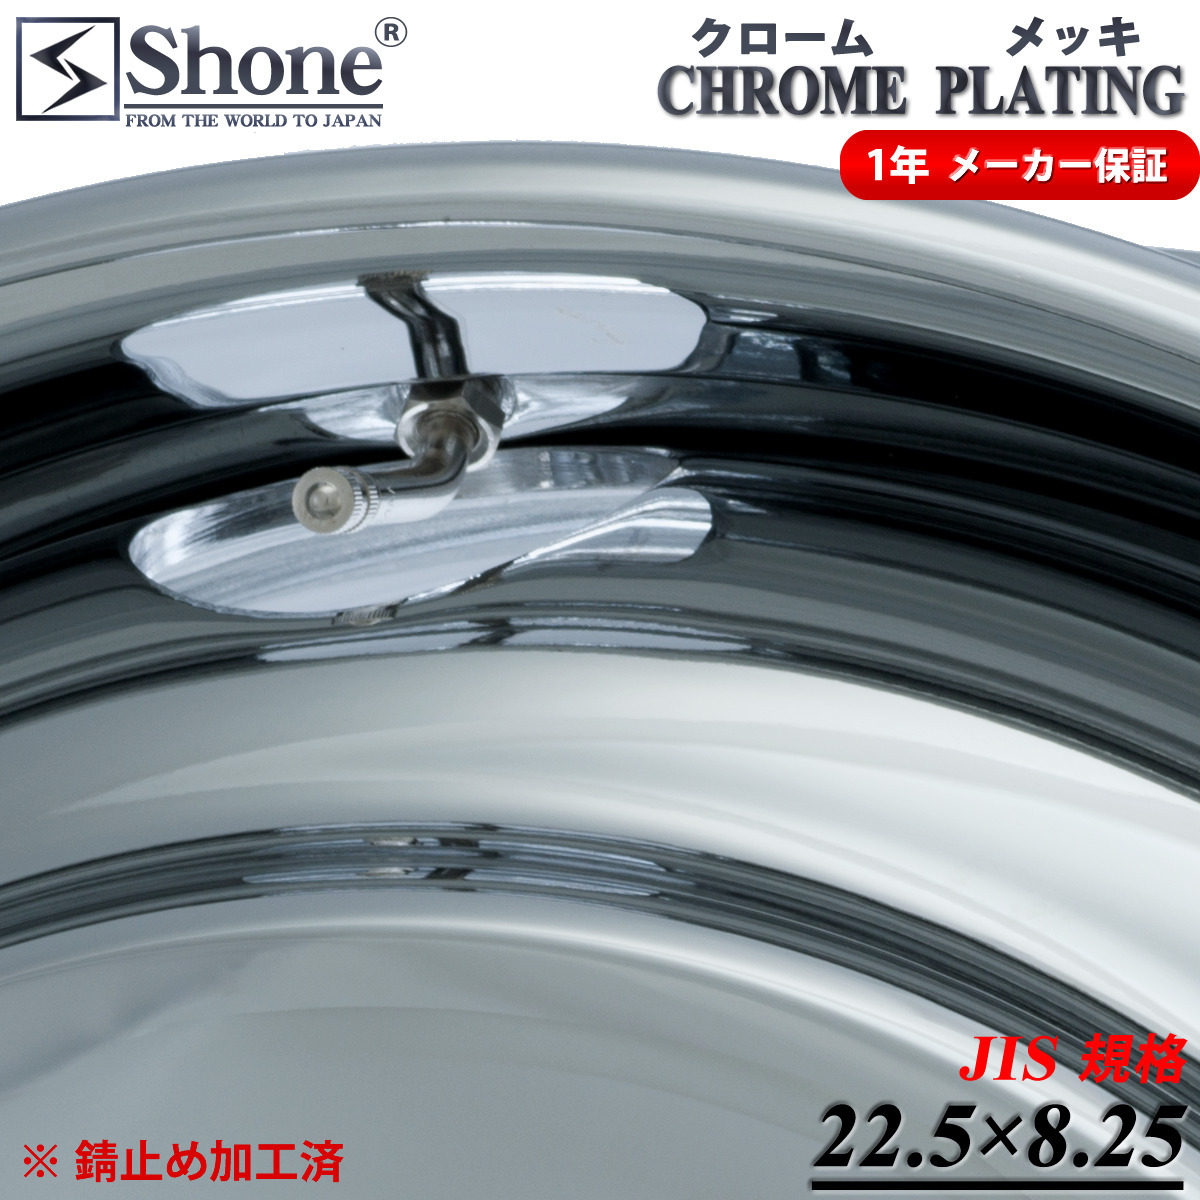  front . for new goods 2 ps price company addressed to free shipping 22.5×8.25 8 hole JIS standard SHONE Chrome plating wheel truck iron large raised-floor 1 year with guarantee NO,SH327